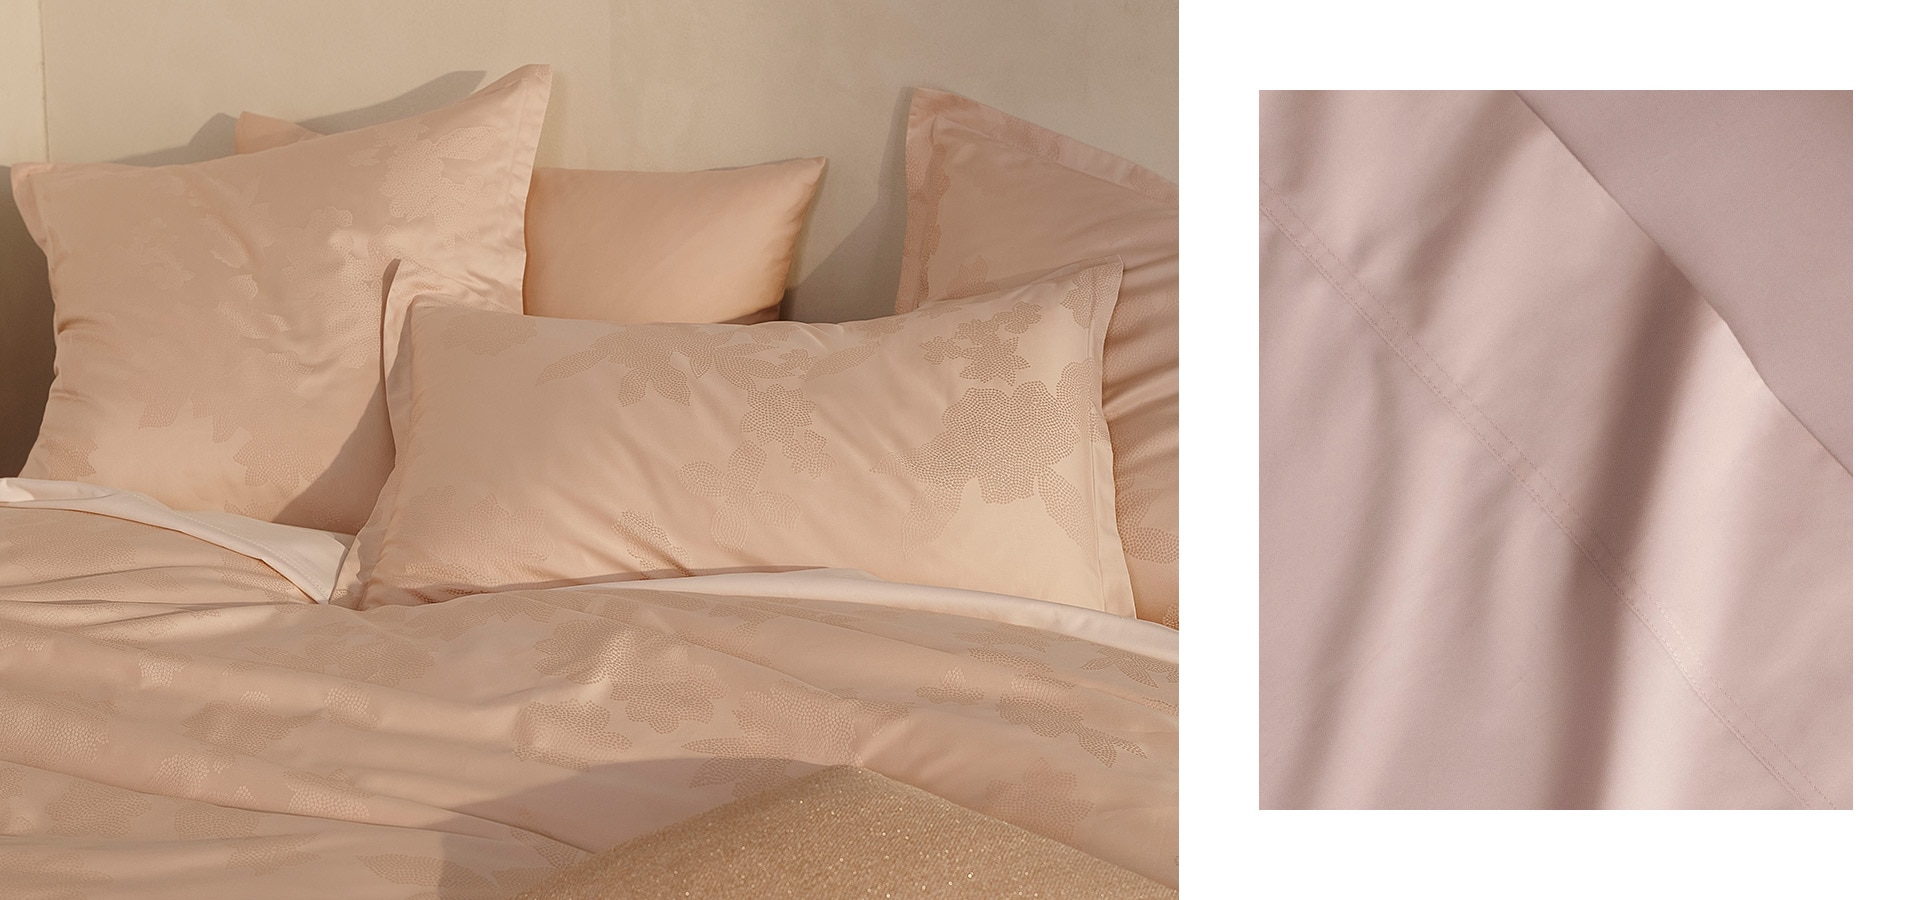 split image. left side is close up of sabal bedhead, with pink pillows and euros layered up against a wall. right side is close up of pink sheet it should be styled with.